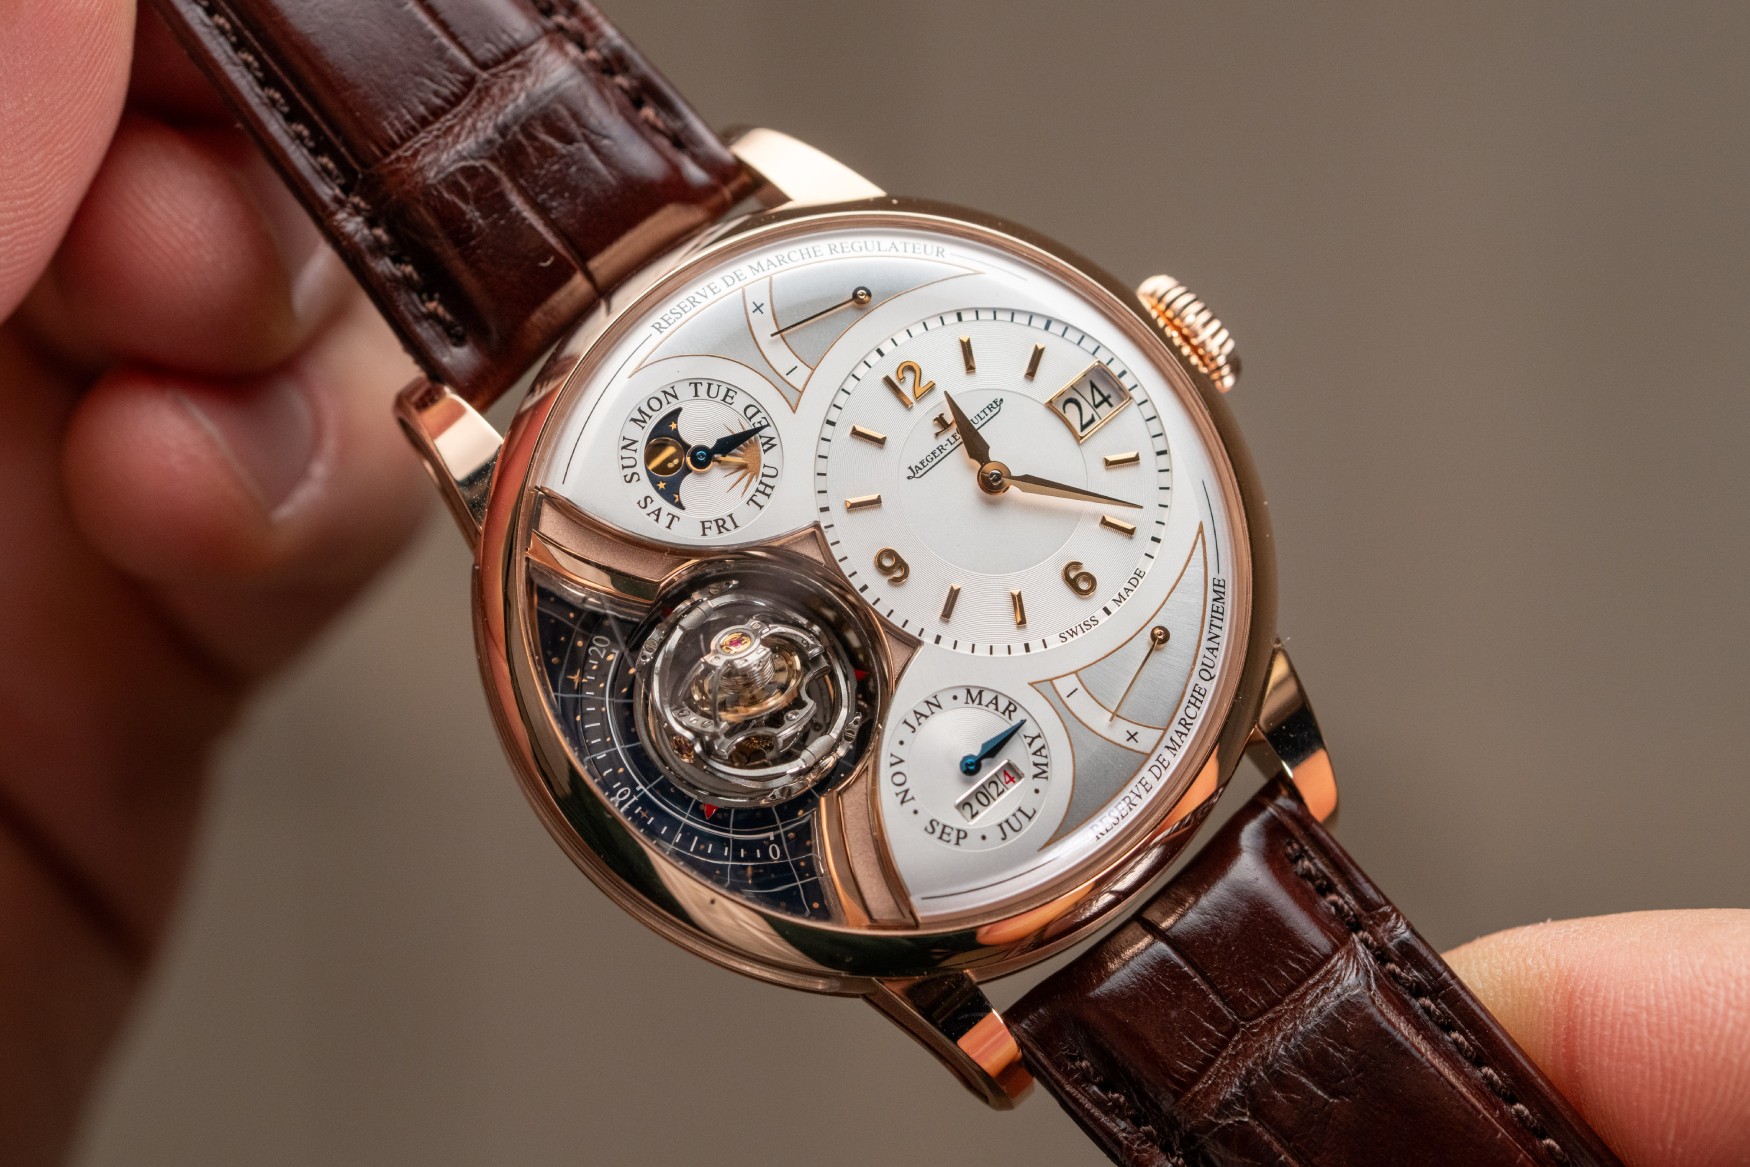 Jaeger-LeCoultre CEO interview | VIDEO